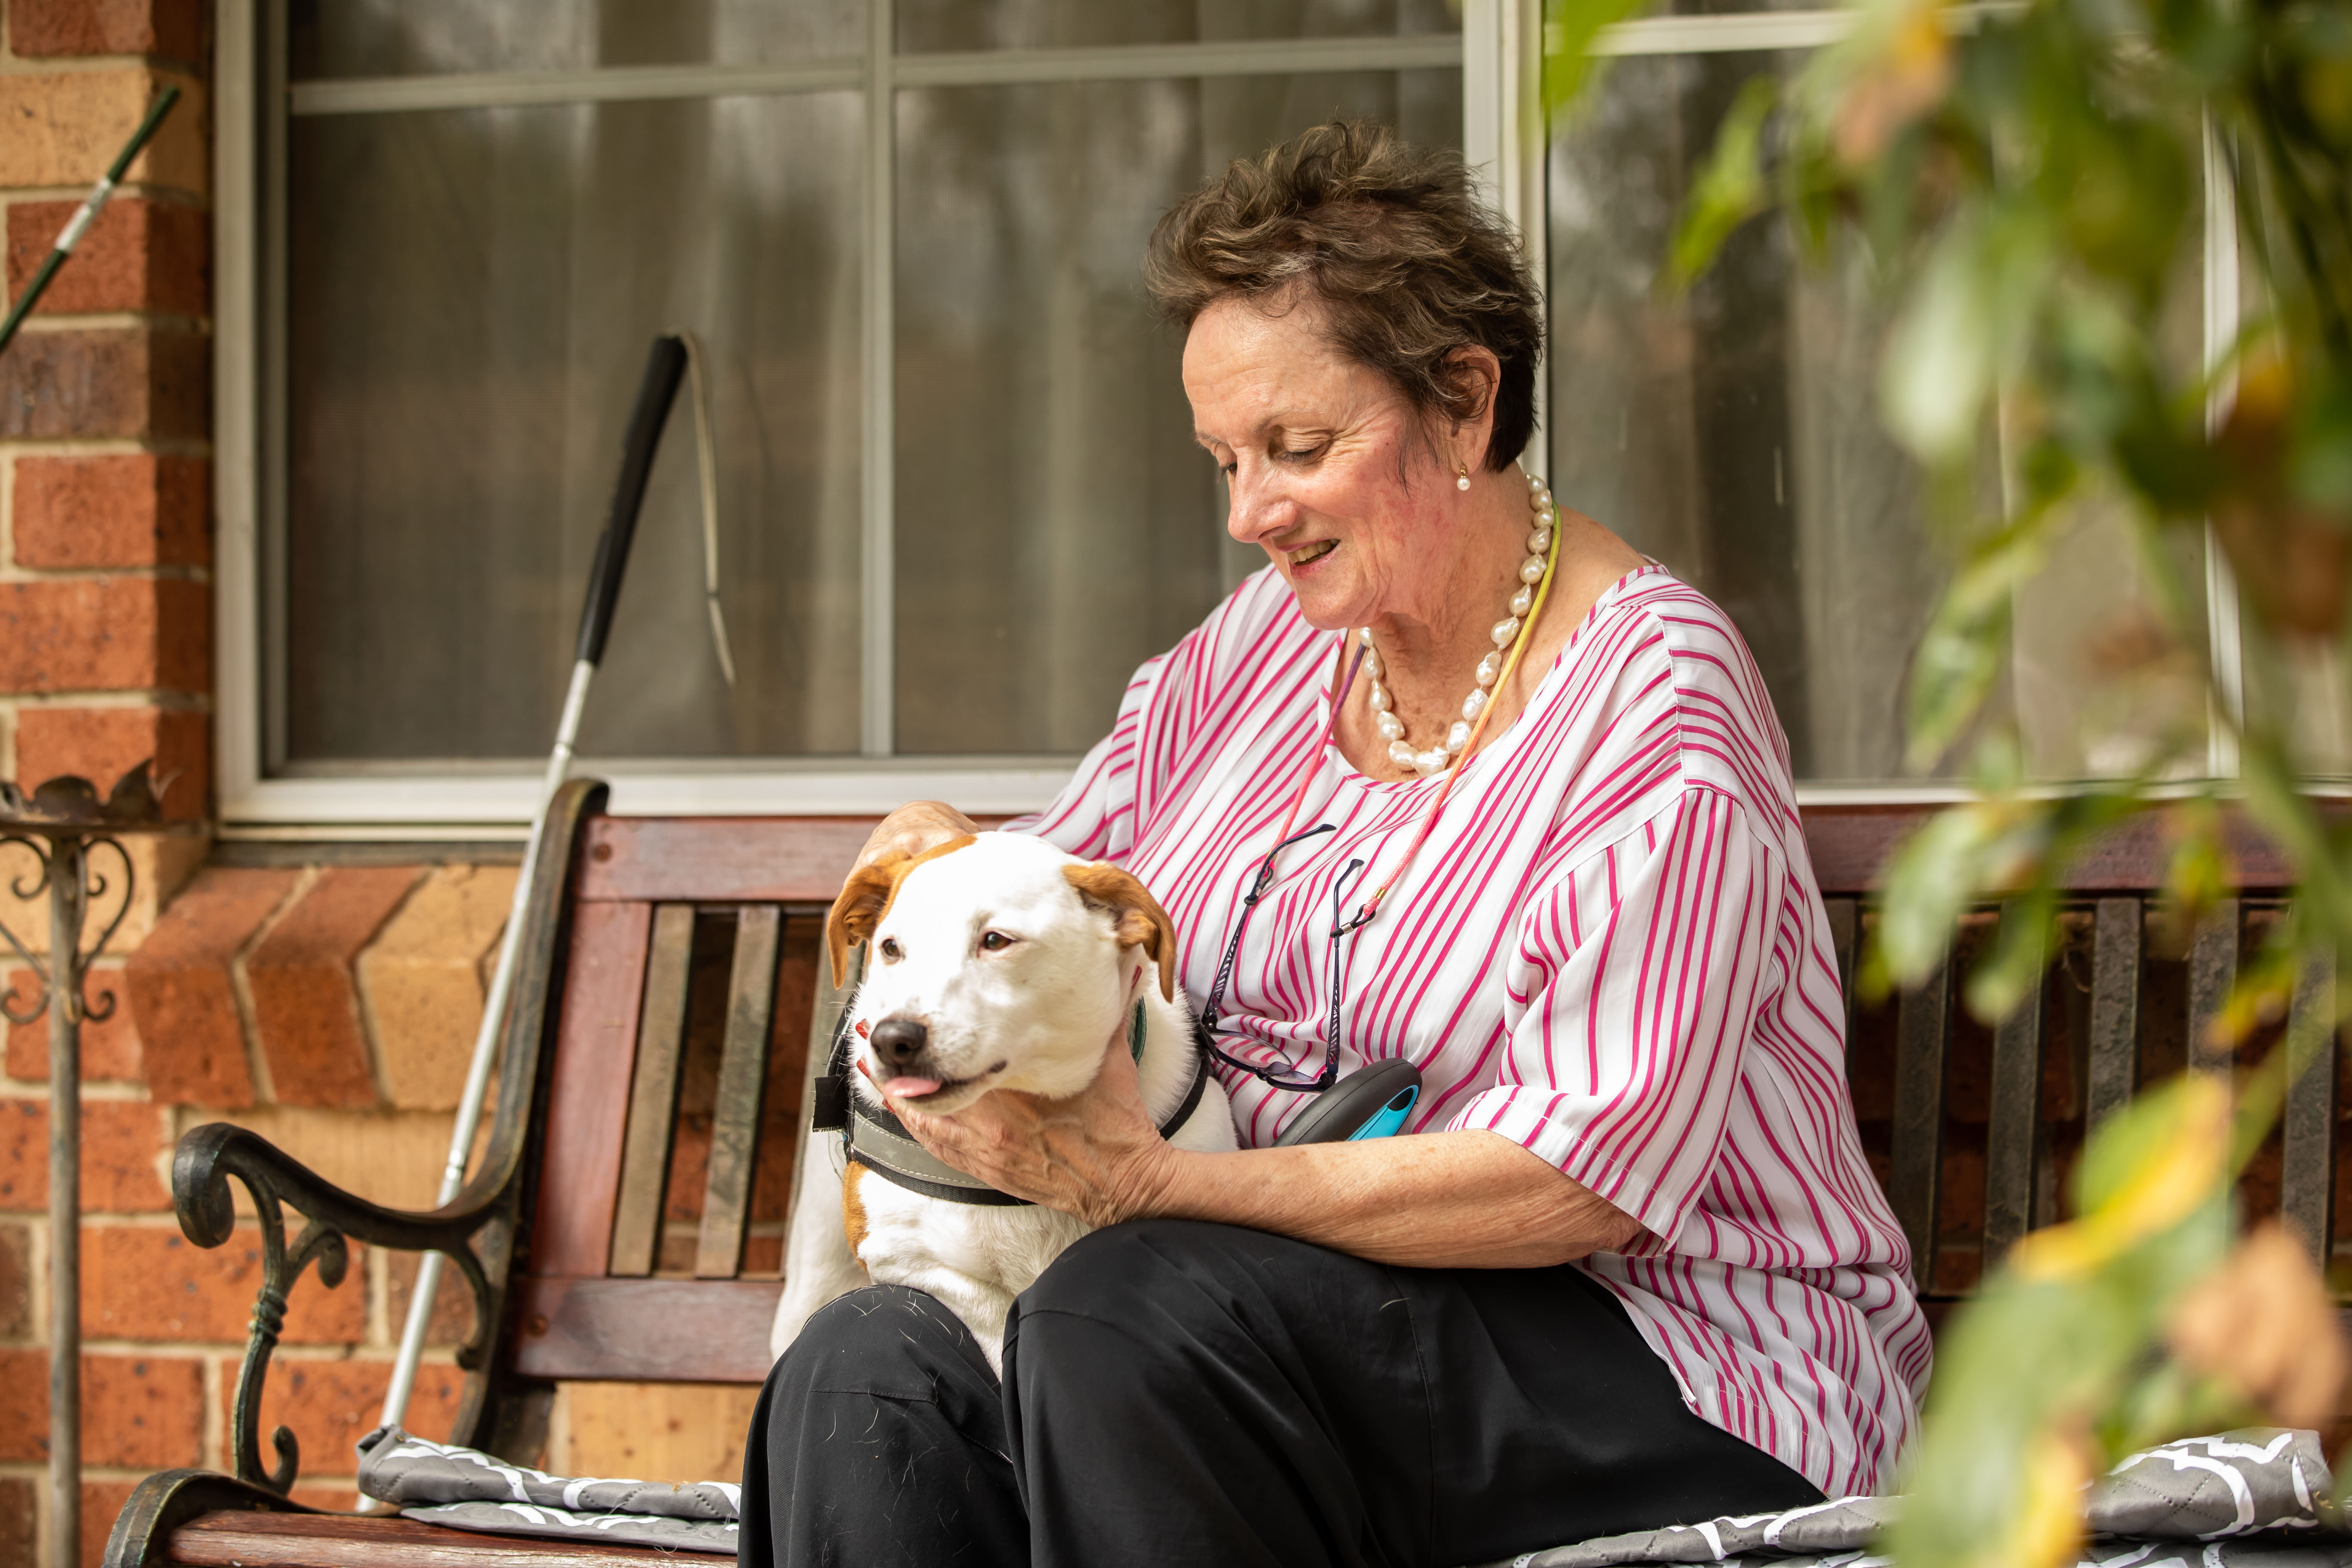 Vision Australia client Cheryl is smiling as she sits on a bench in her front garden with her dog guide.